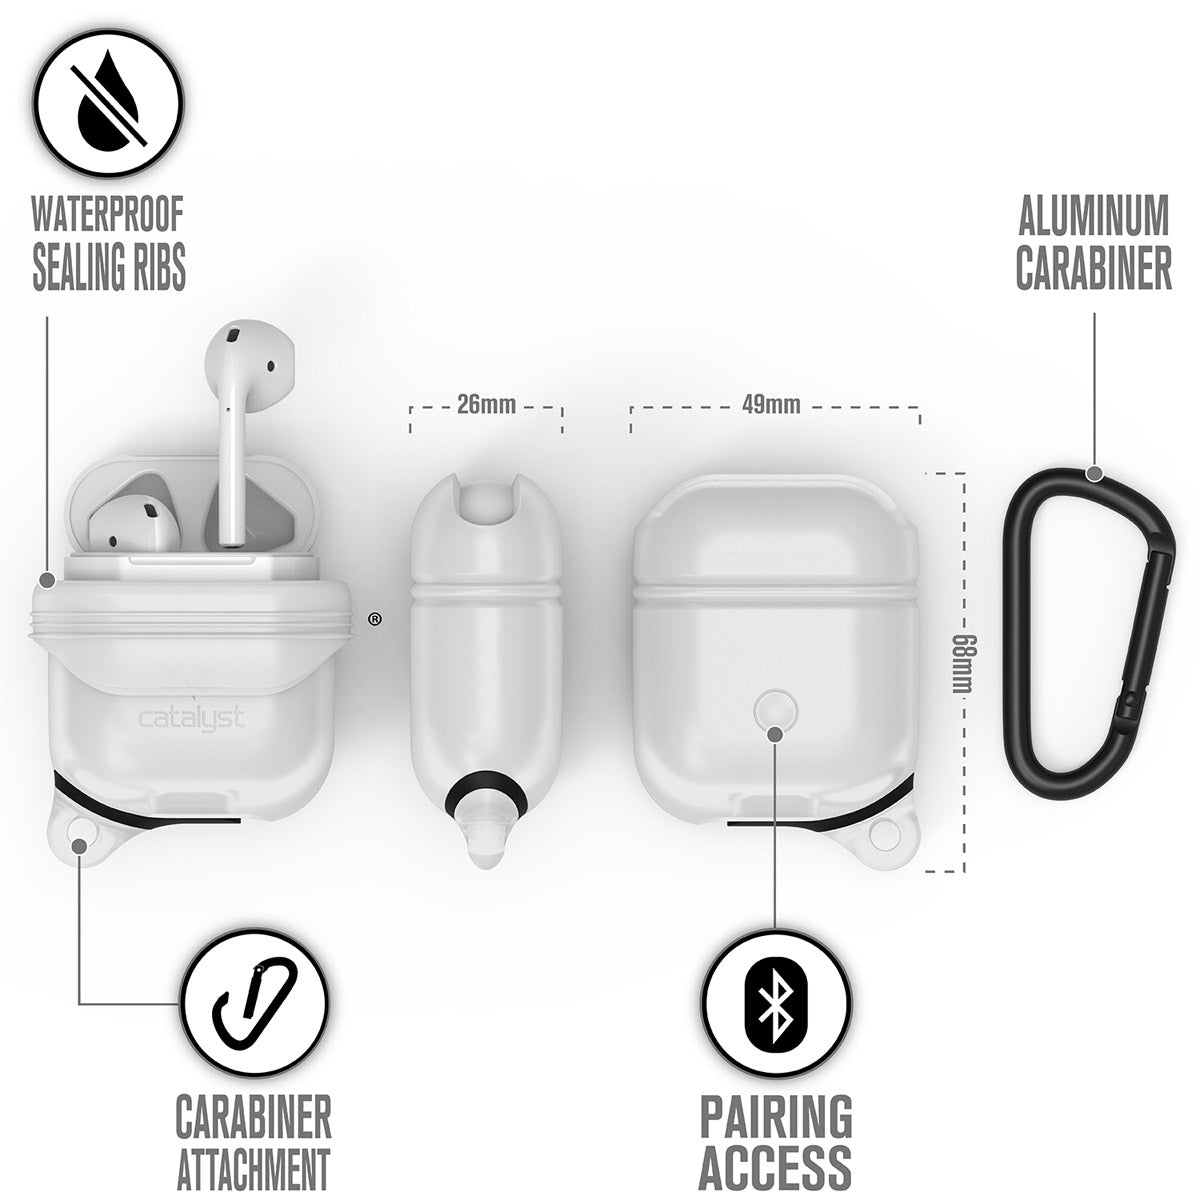 Catalyst airpods gen2/1 waterproof case + carabiner showing the case dimension and features in frost white text reads waterproof sealing ribs aluminum carabiner pairing access carabiner attachment